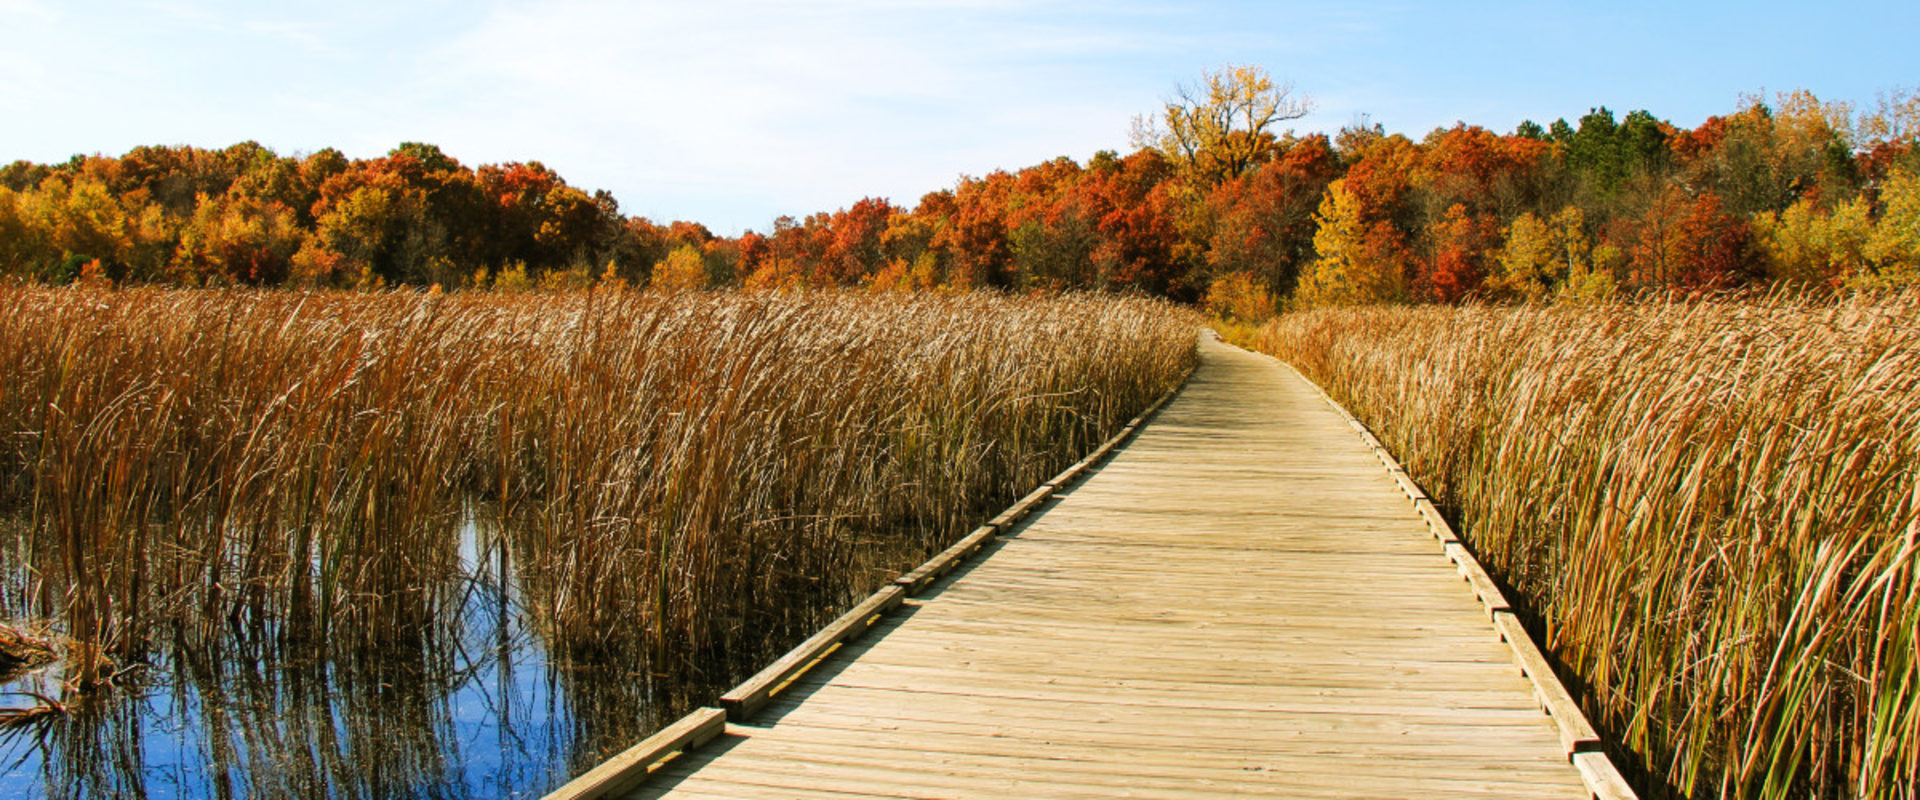 Exploring Anoka County Parks: What You Need to Know